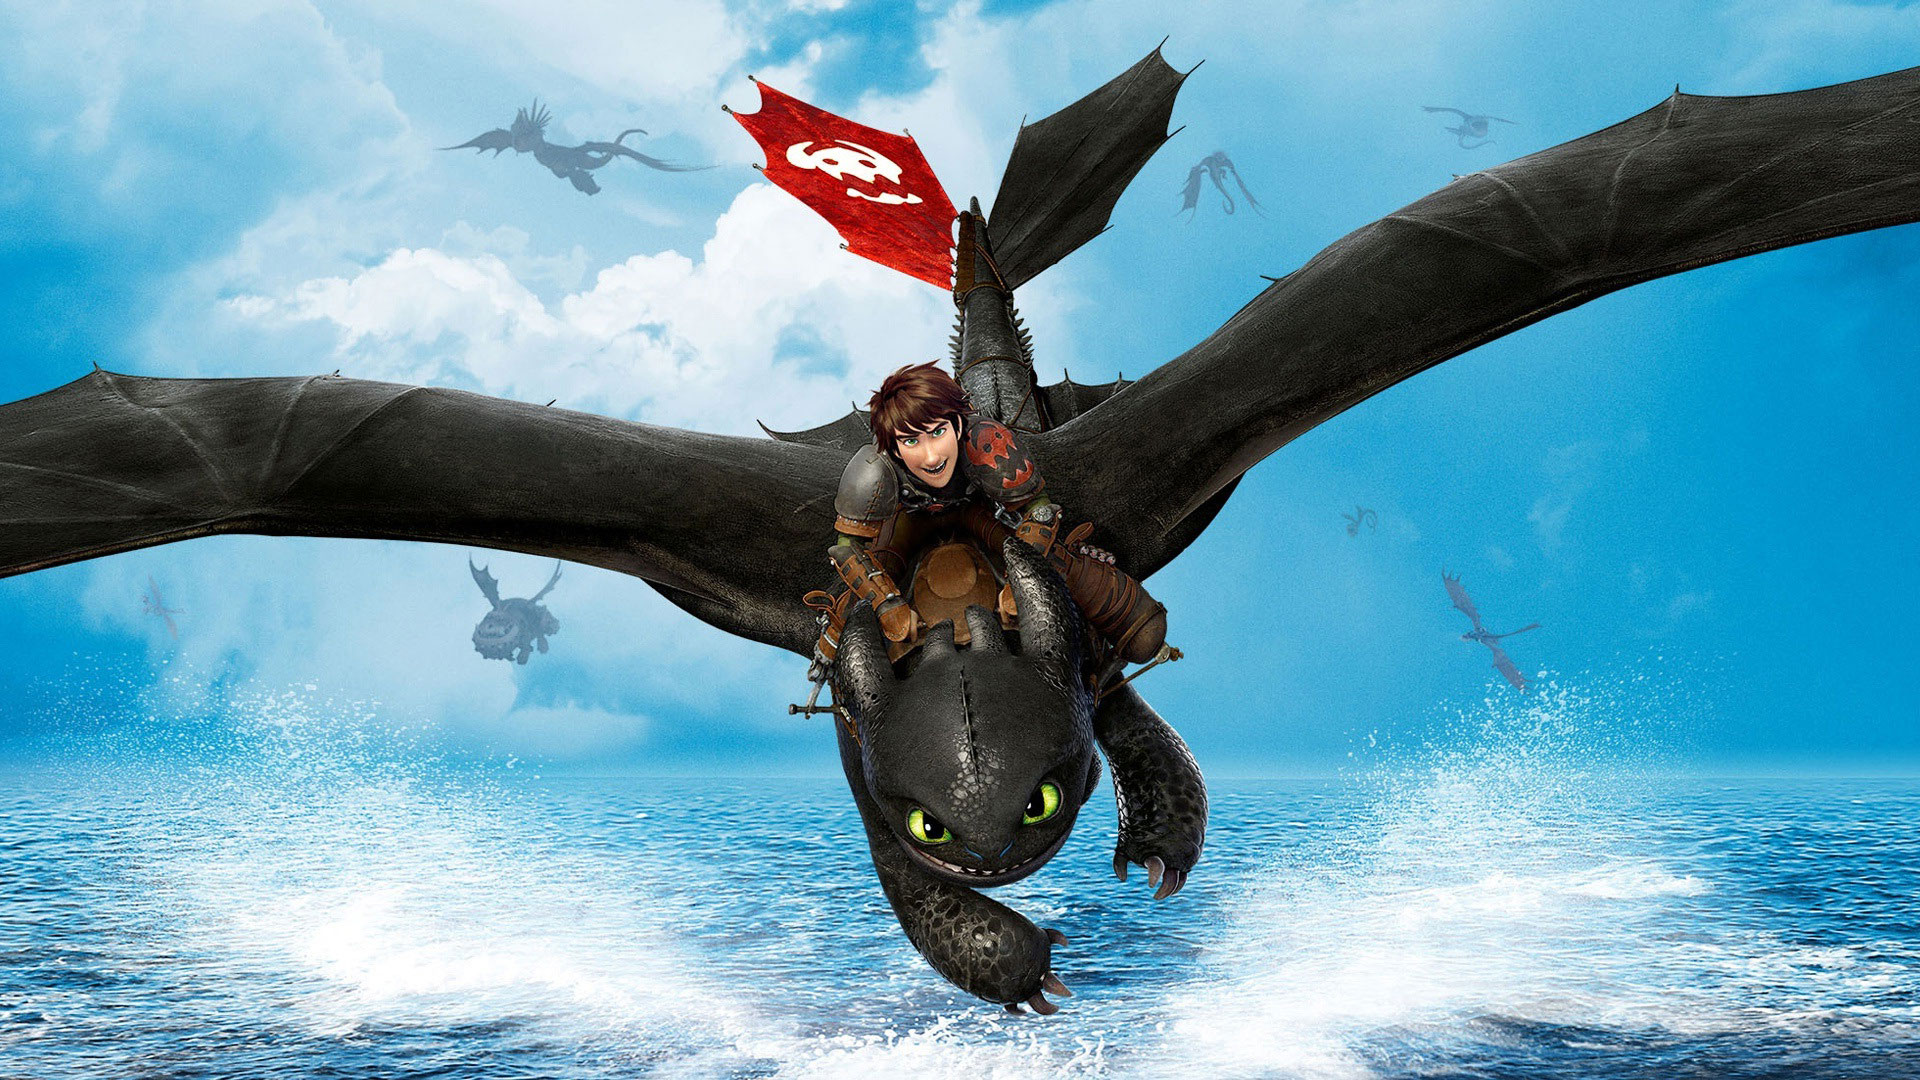 How To Train Your Dragon HD wallpapers, Desktop wallpaper - most viewed